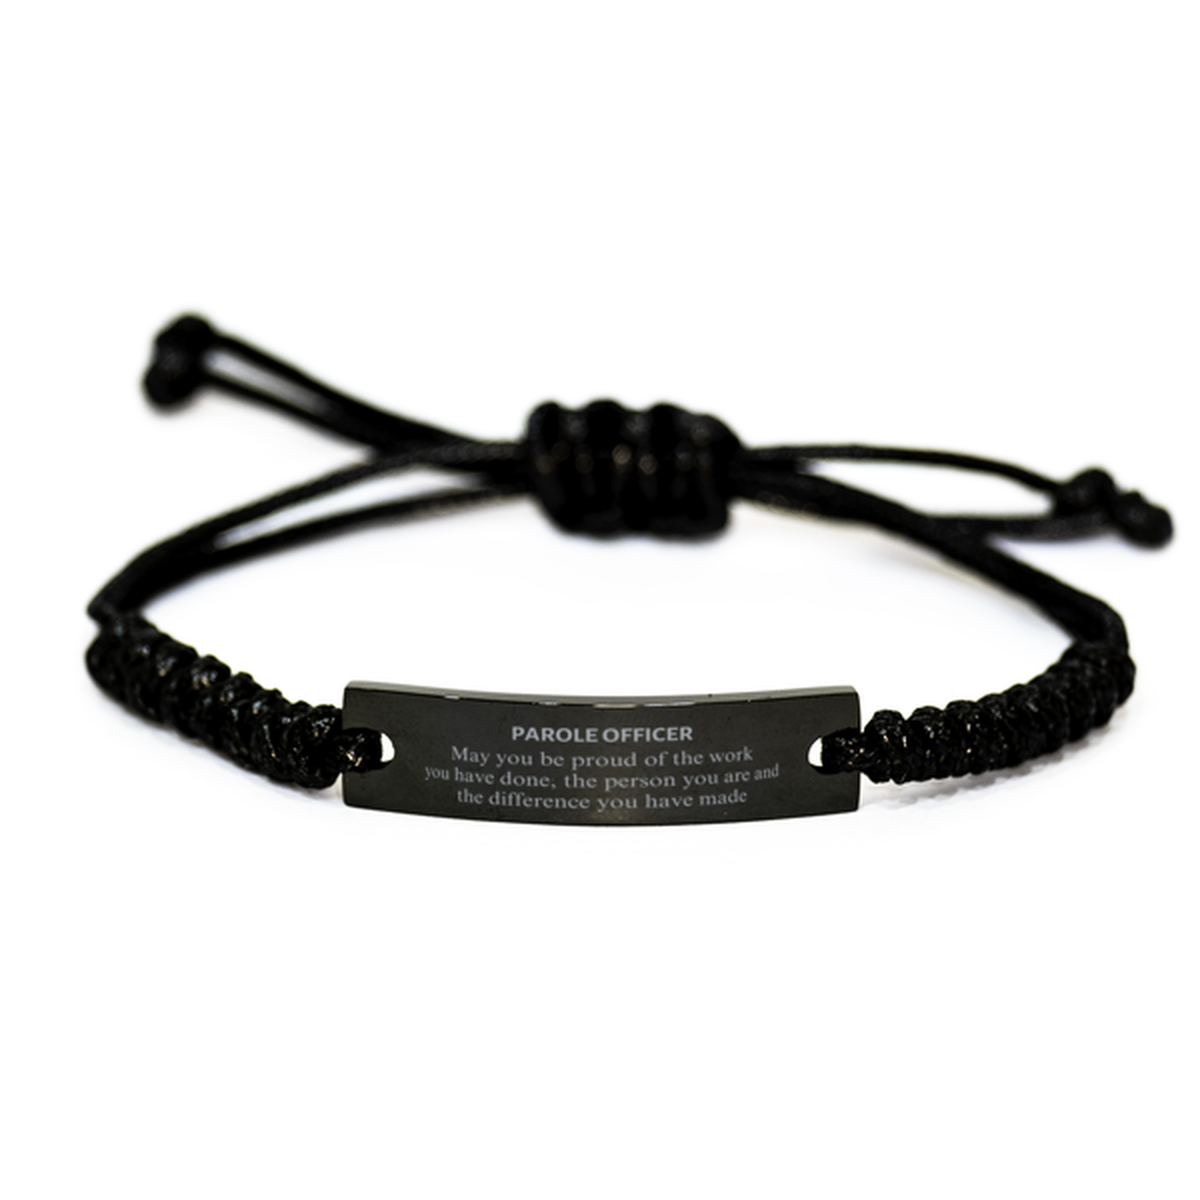 Parole Officer May you be proud of the work you have done, Retirement Parole Officer Black Rope Bracelet for Colleague Appreciation Gifts Amazing for Parole Officer